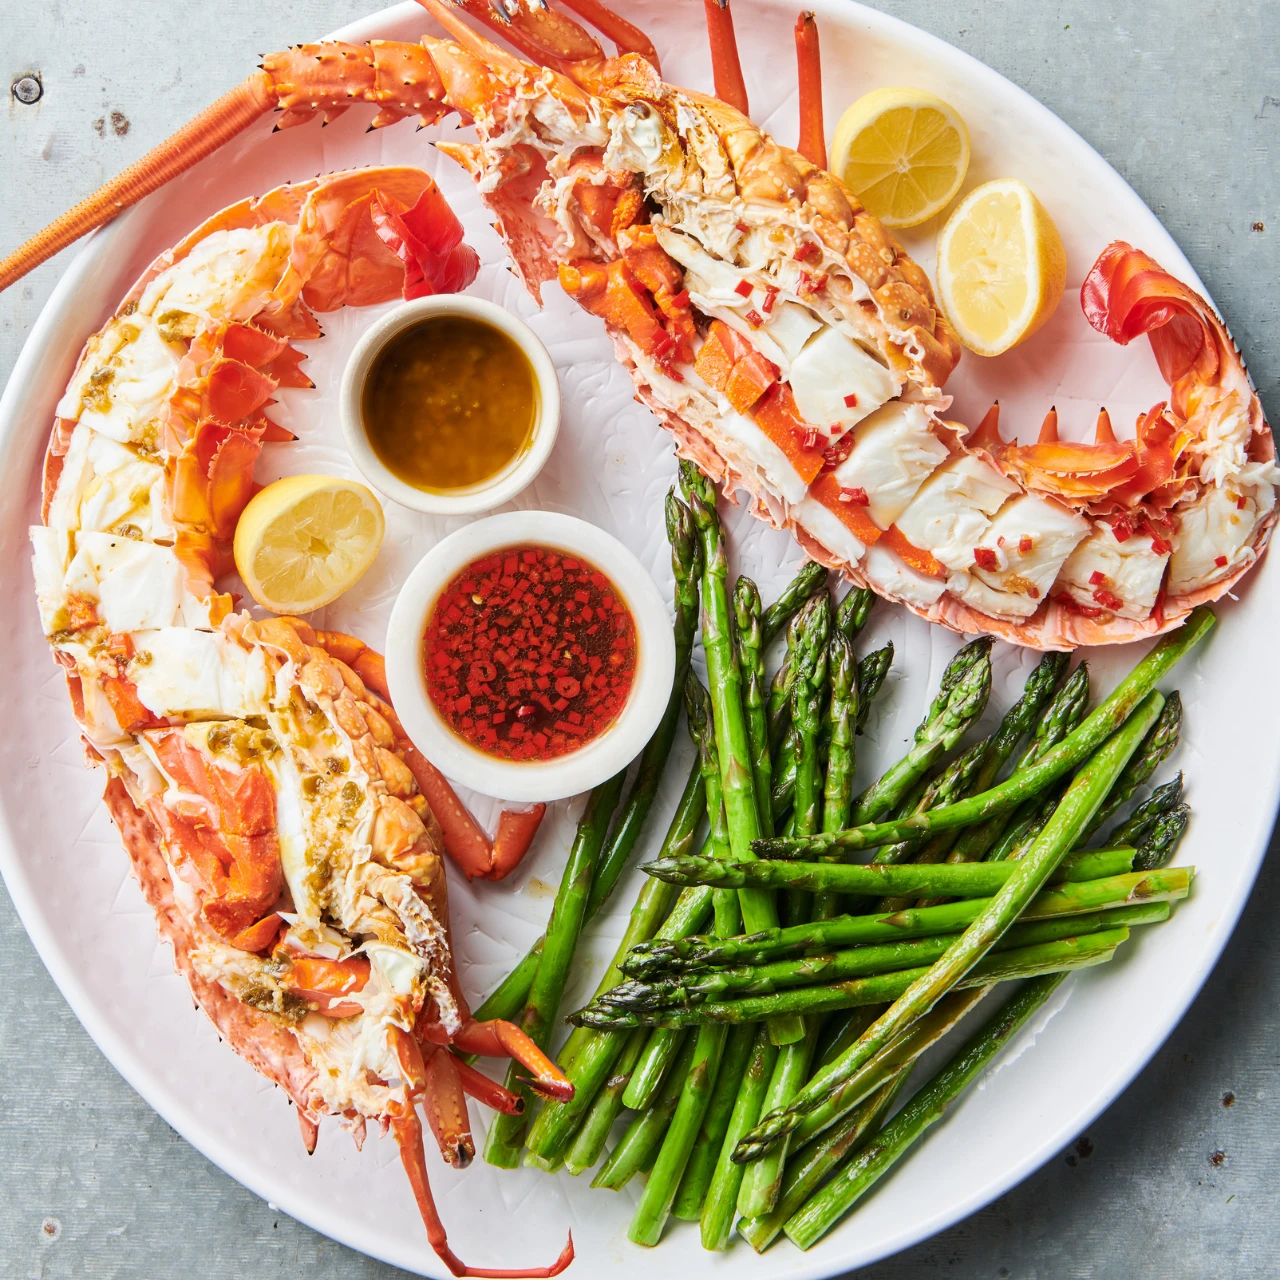 Best way to have New Zealand Crayfish is with two dipping sauces. A quick and easy starter that everyone will want more of.